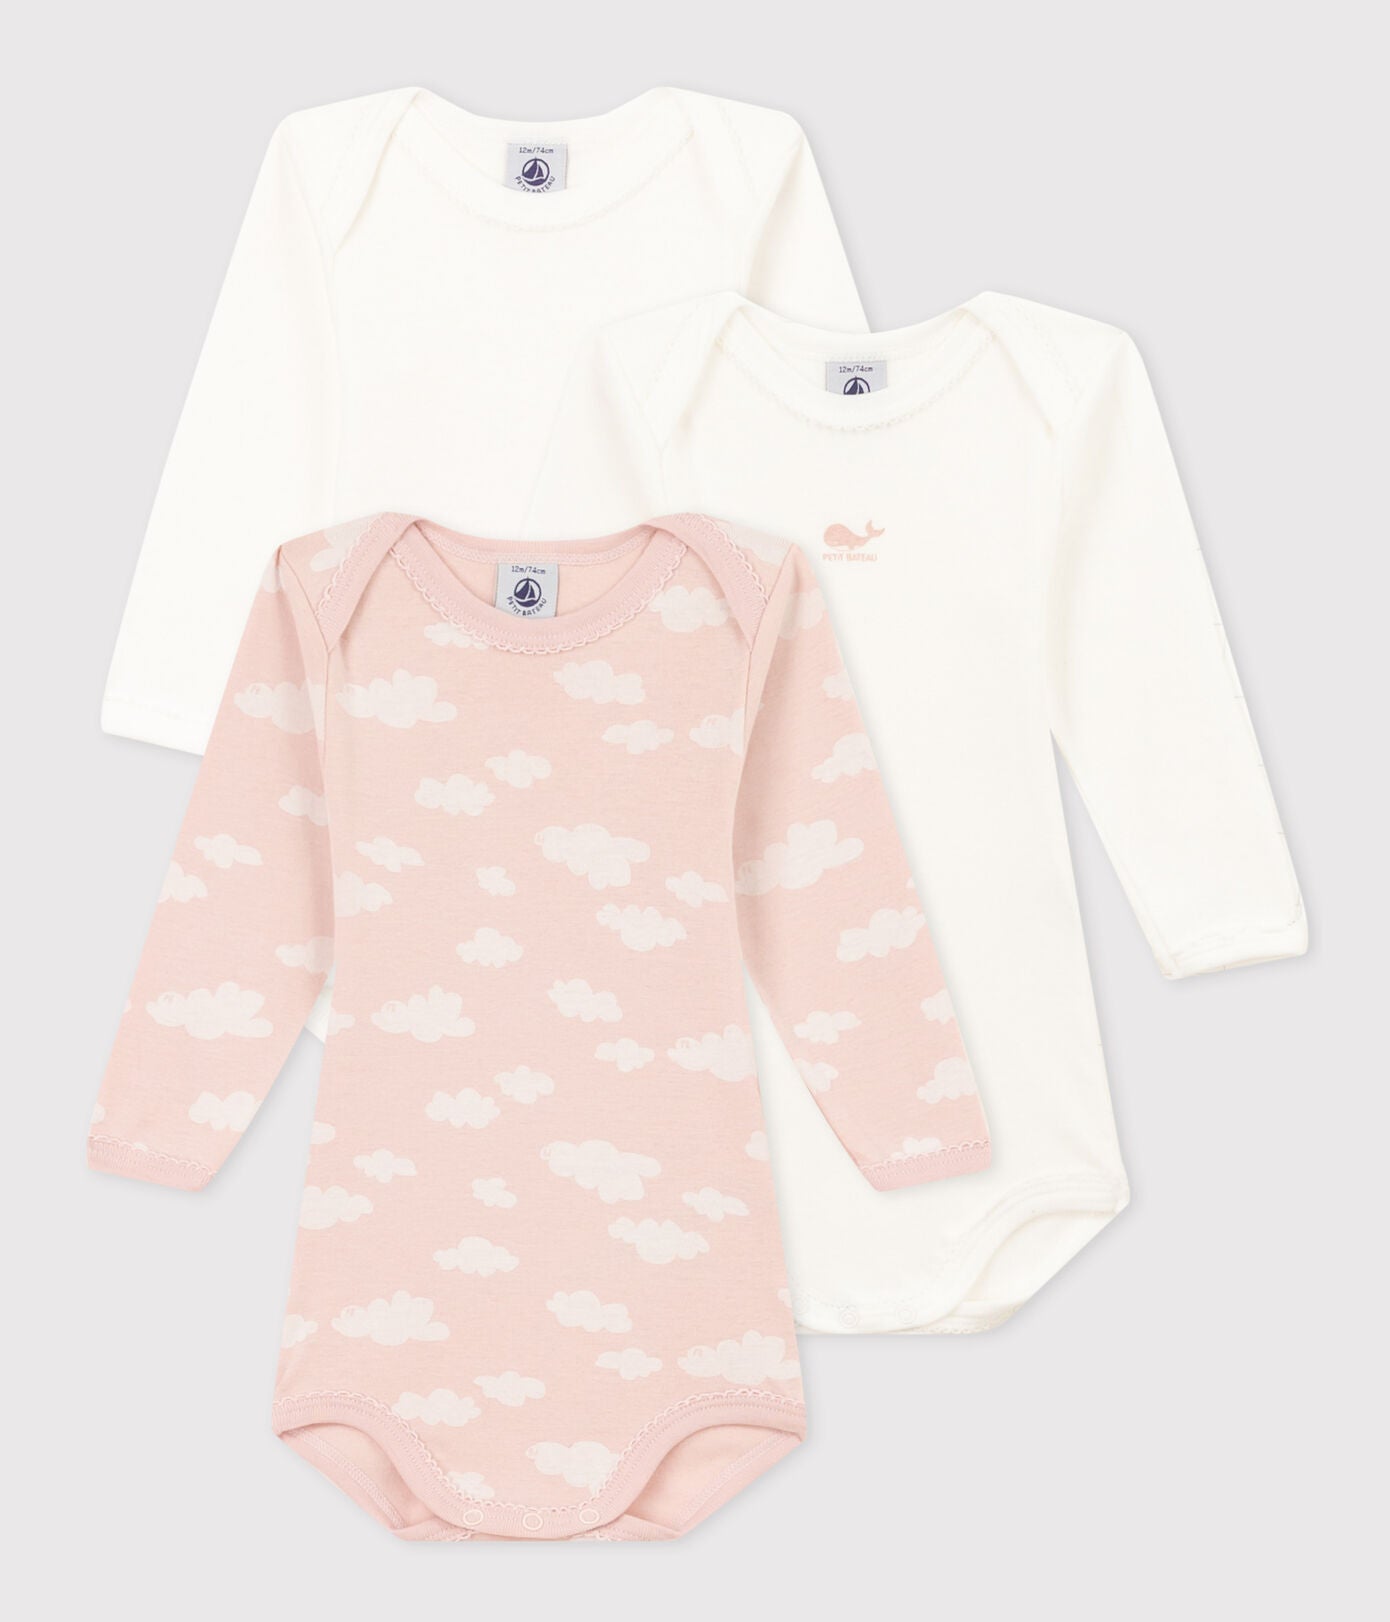 Petit Bateau Baby Set of Two Ribbed LS Cross Over Bodysuits Beige